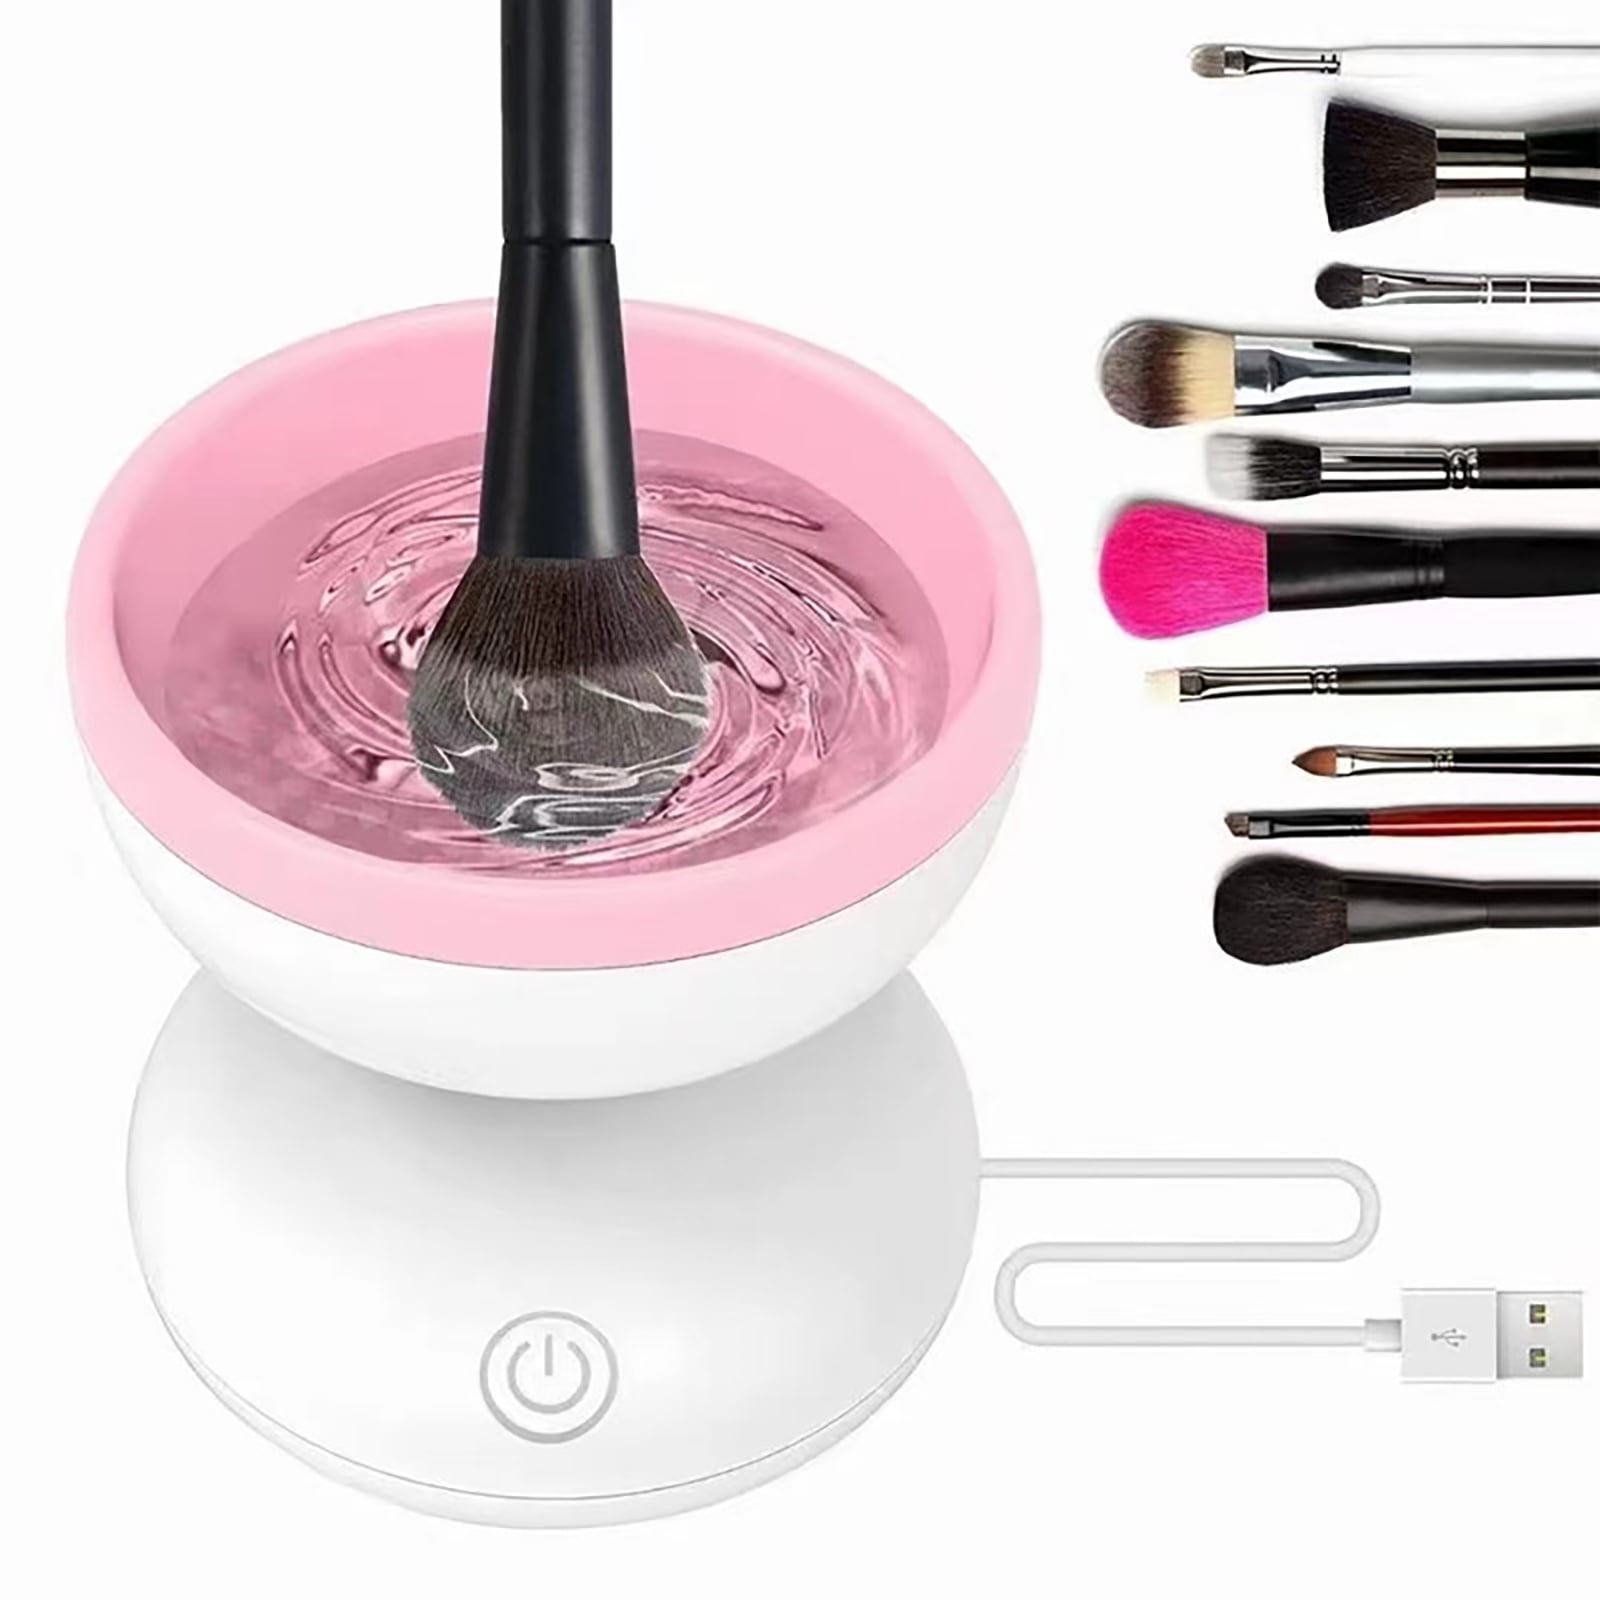 Girlearle™ Makeup Brush Cleaner, Automatic Spinning Makeup Brush Cleaner  Fit For All Size Makeup Brush